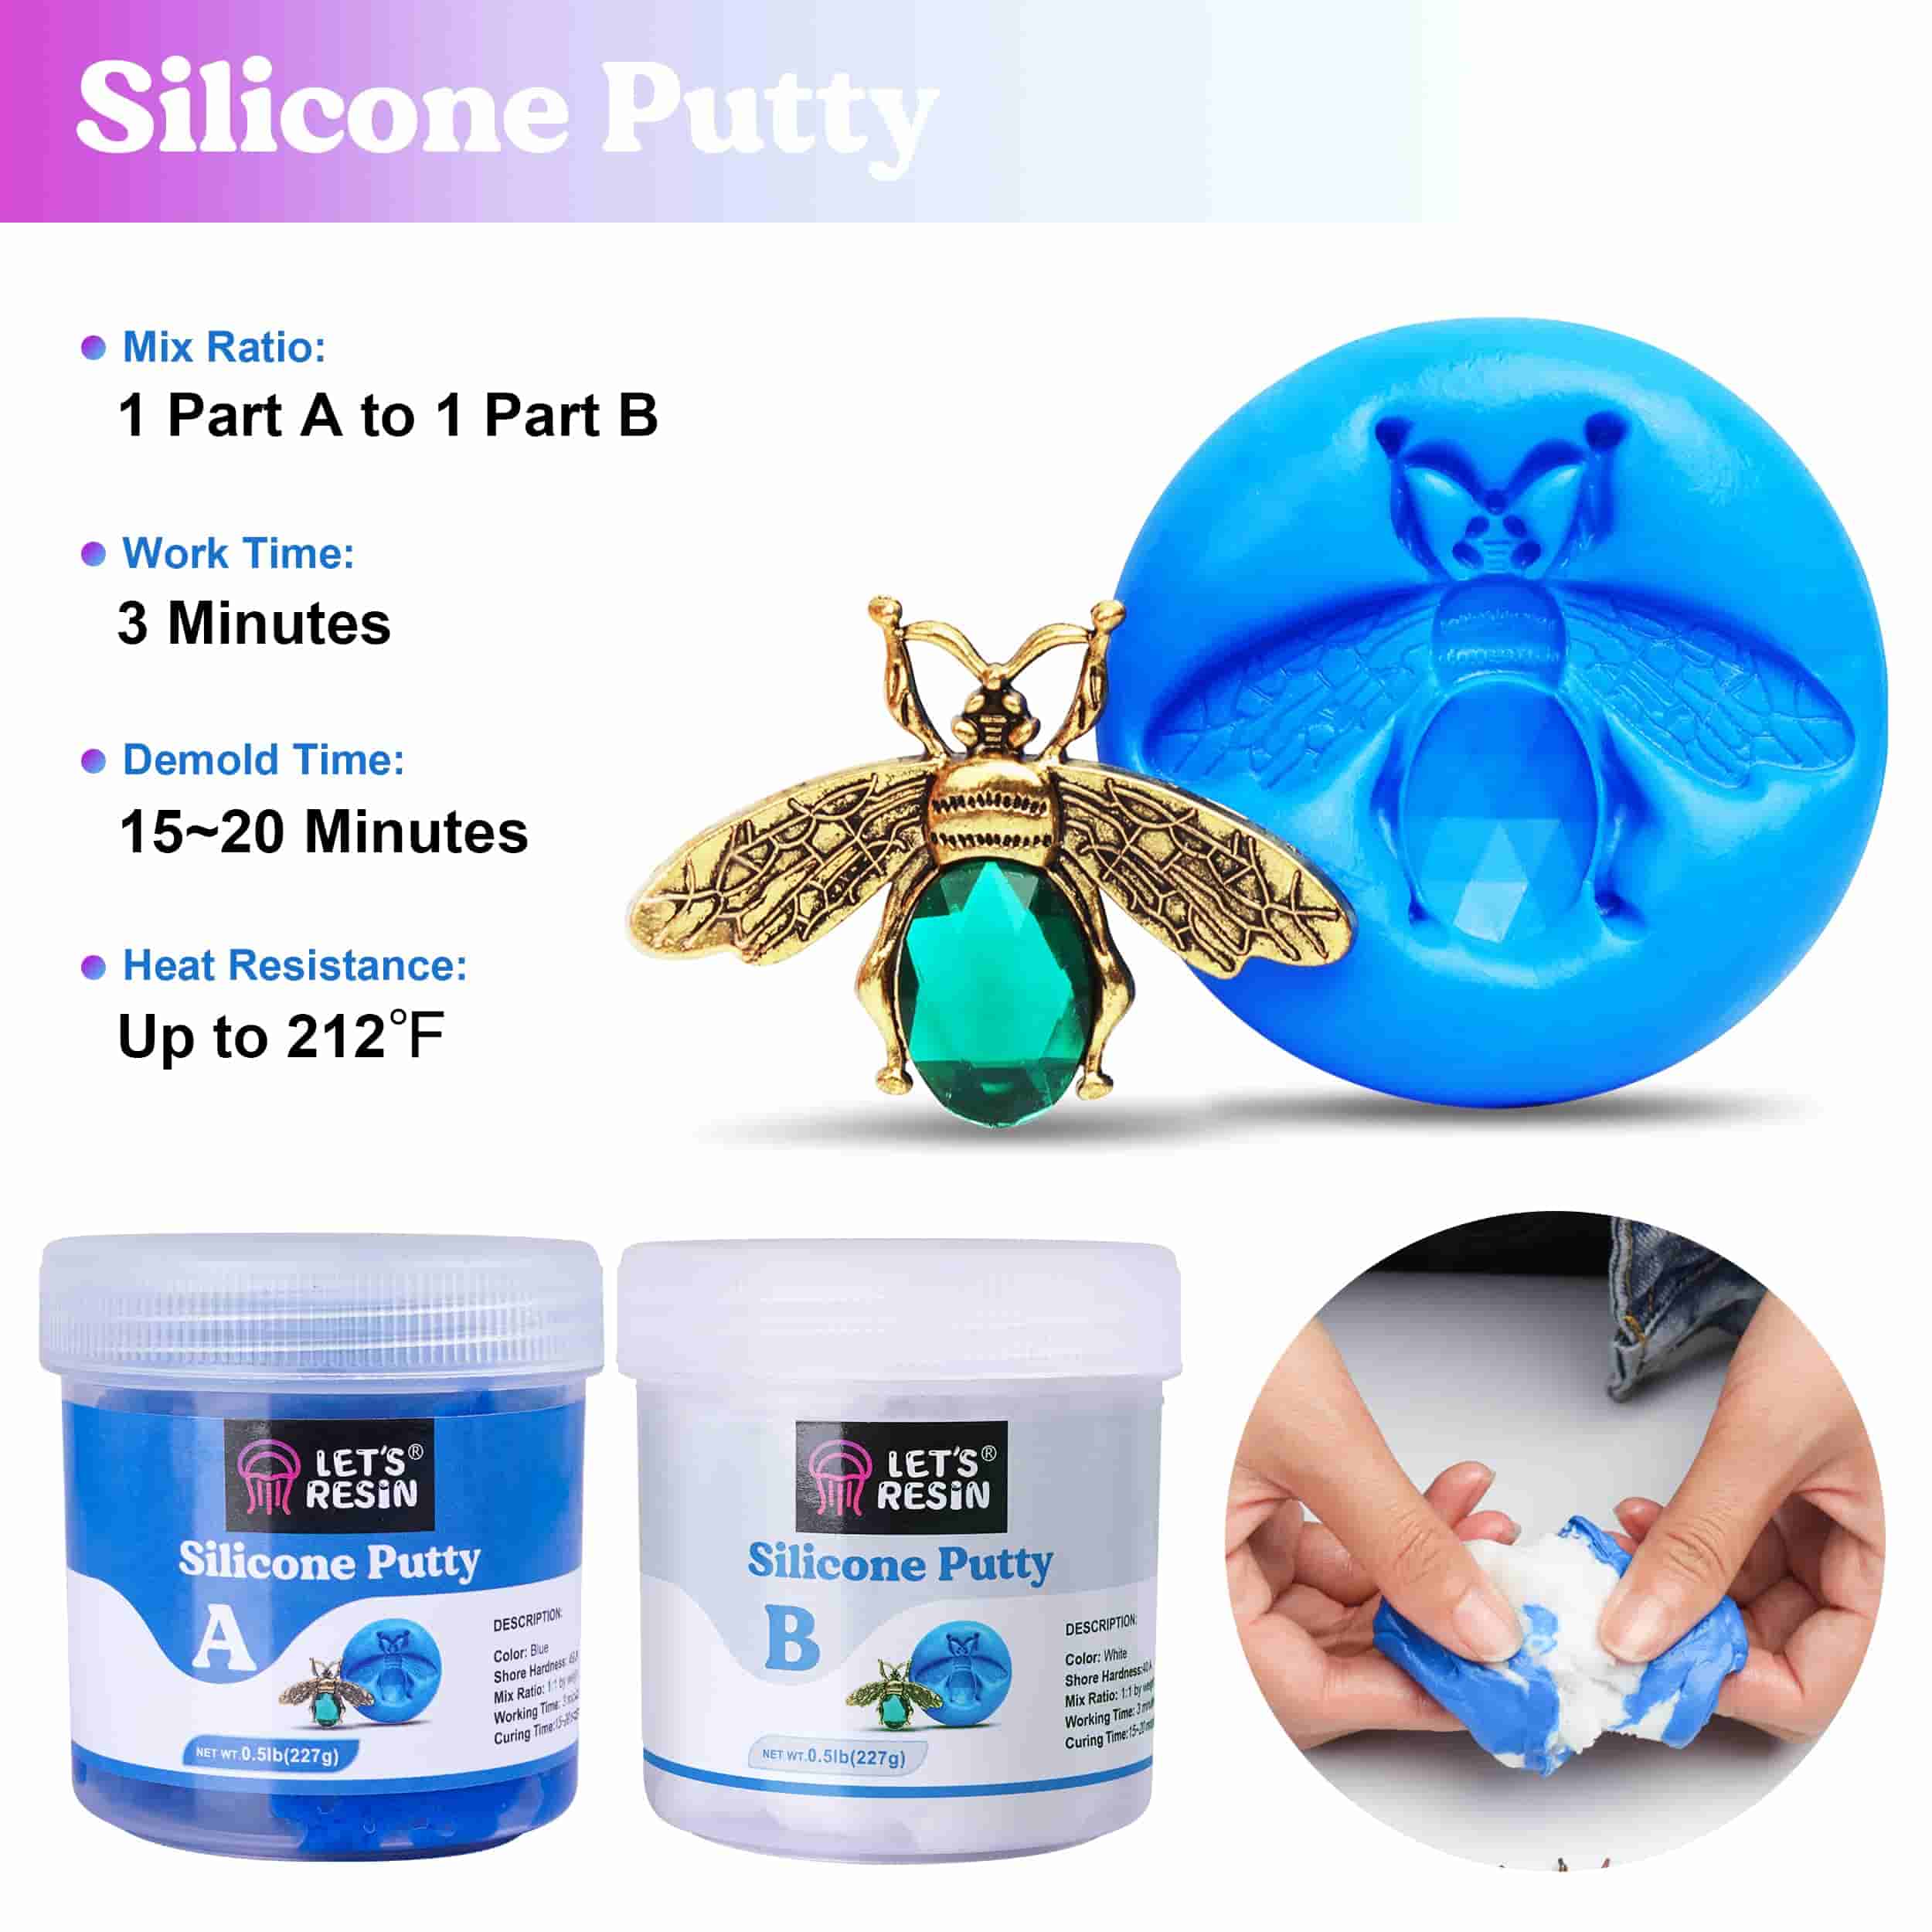 Silicone Putty Flexible Silicone Mold Make Kit For Reusable Silicone Molds  Making - Easy 1:1 Mixing Ratio Fast Cured Mold Putty For Casting, Resin Mol